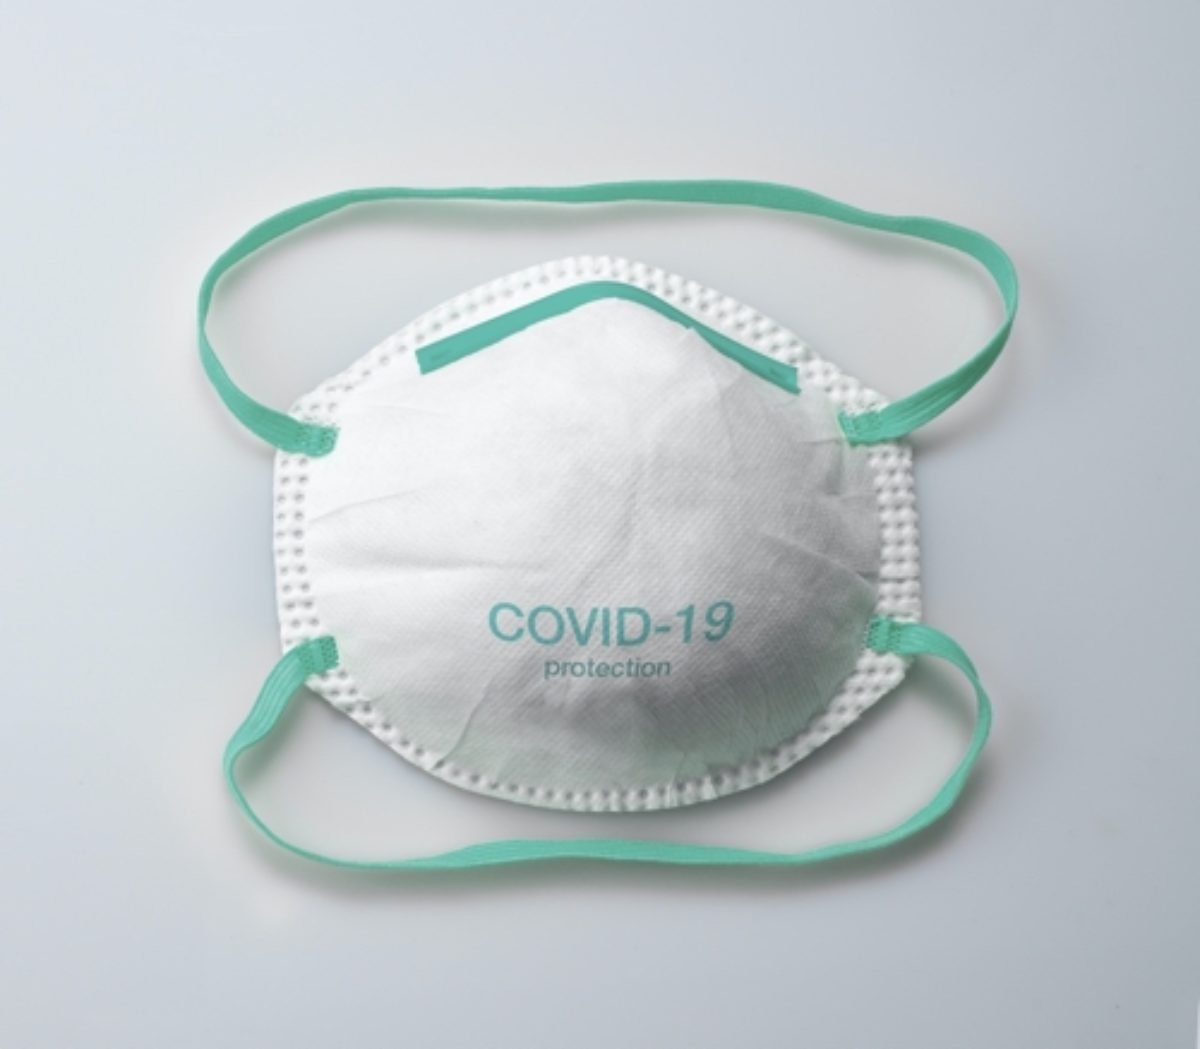 Medical face mask with the word "Covid-19" printed on it.